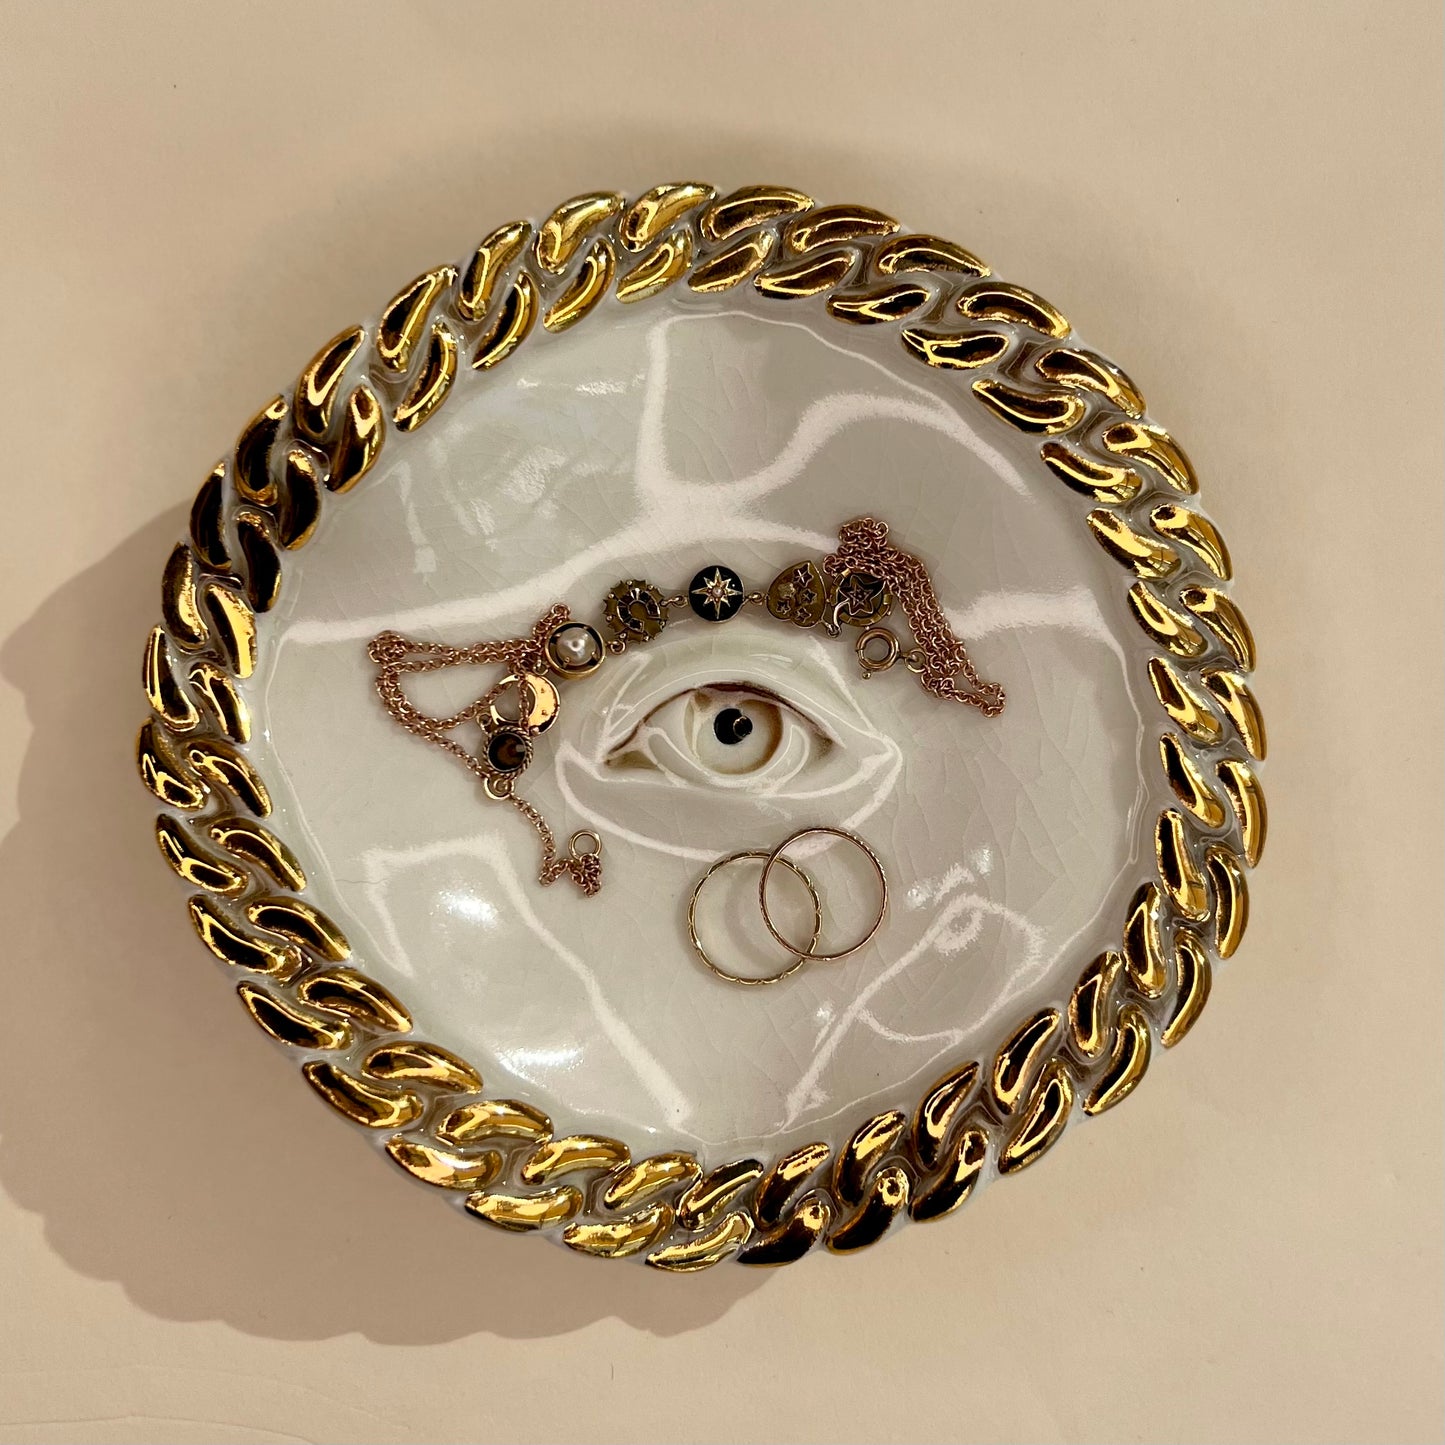 Jewellery Dish 2 -  Hand crafted Porcelain Home Ornament. Circular ornament with Chain Border & Unique Eye Design